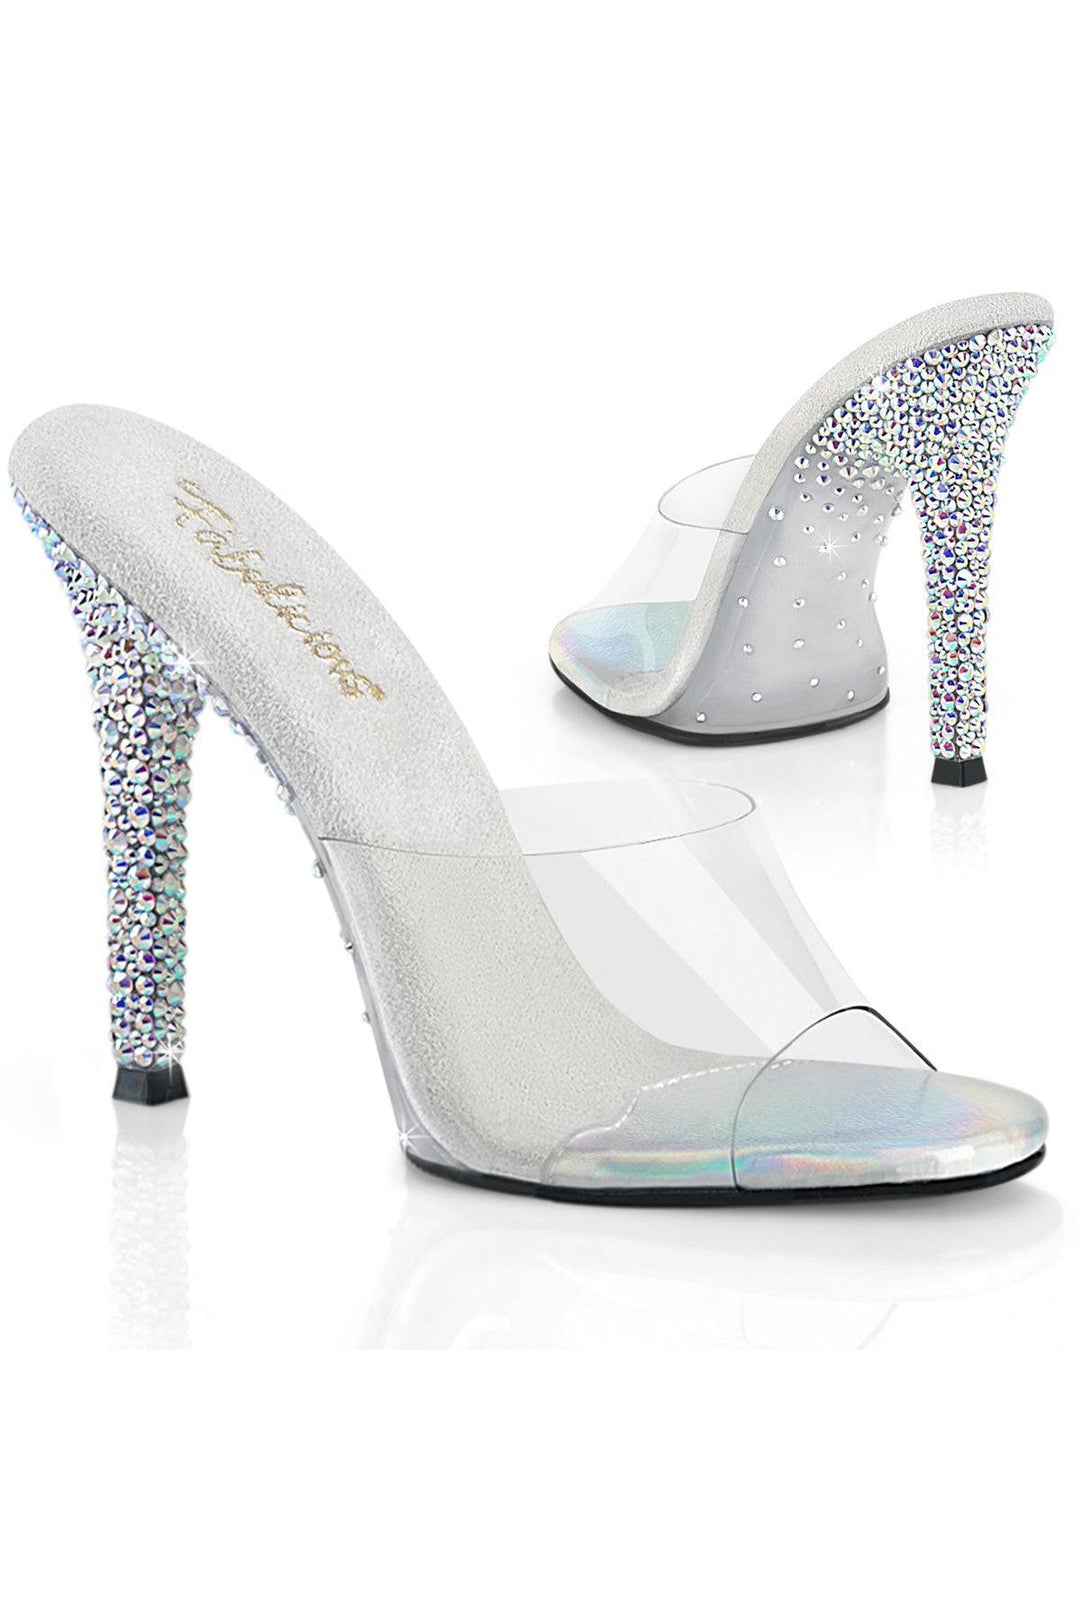 Fabulicious Clear Slides Platform Stripper Shoes | Buy at Sexyshoes.com